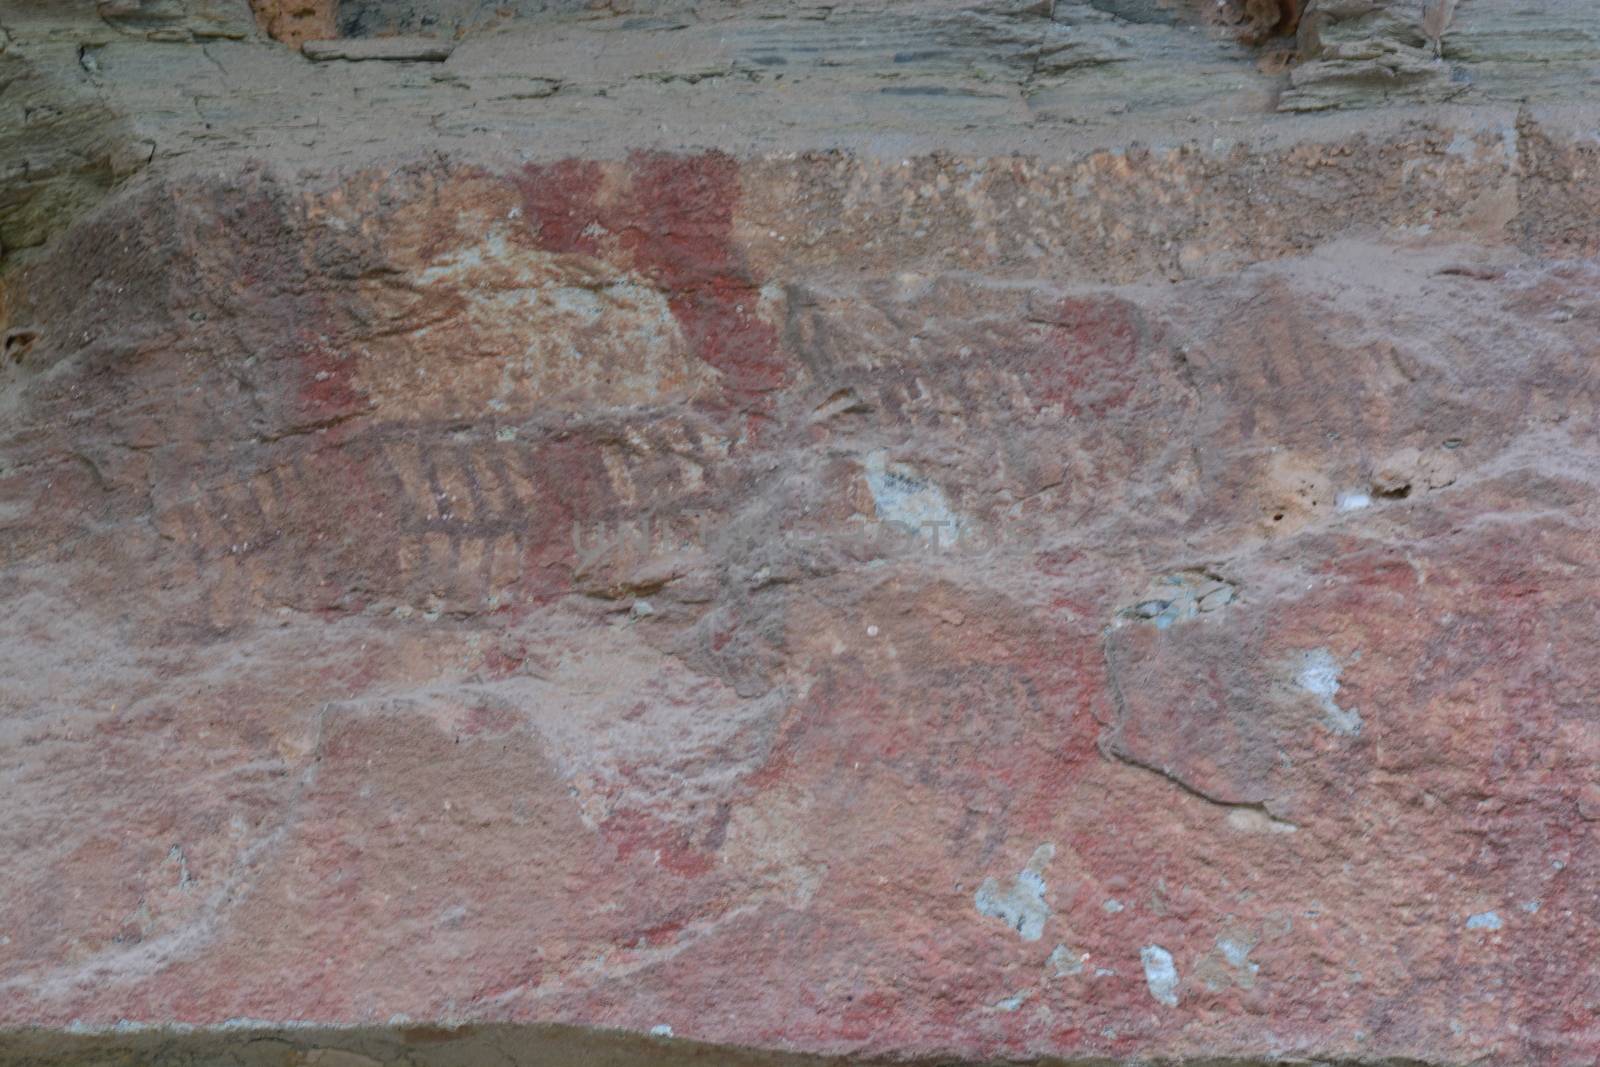 3,000 year-old cliff paintings.
Pha Taem The Prehistorical Painting Cliff Tourist Attraction in Ubonratchathani, Thailand
